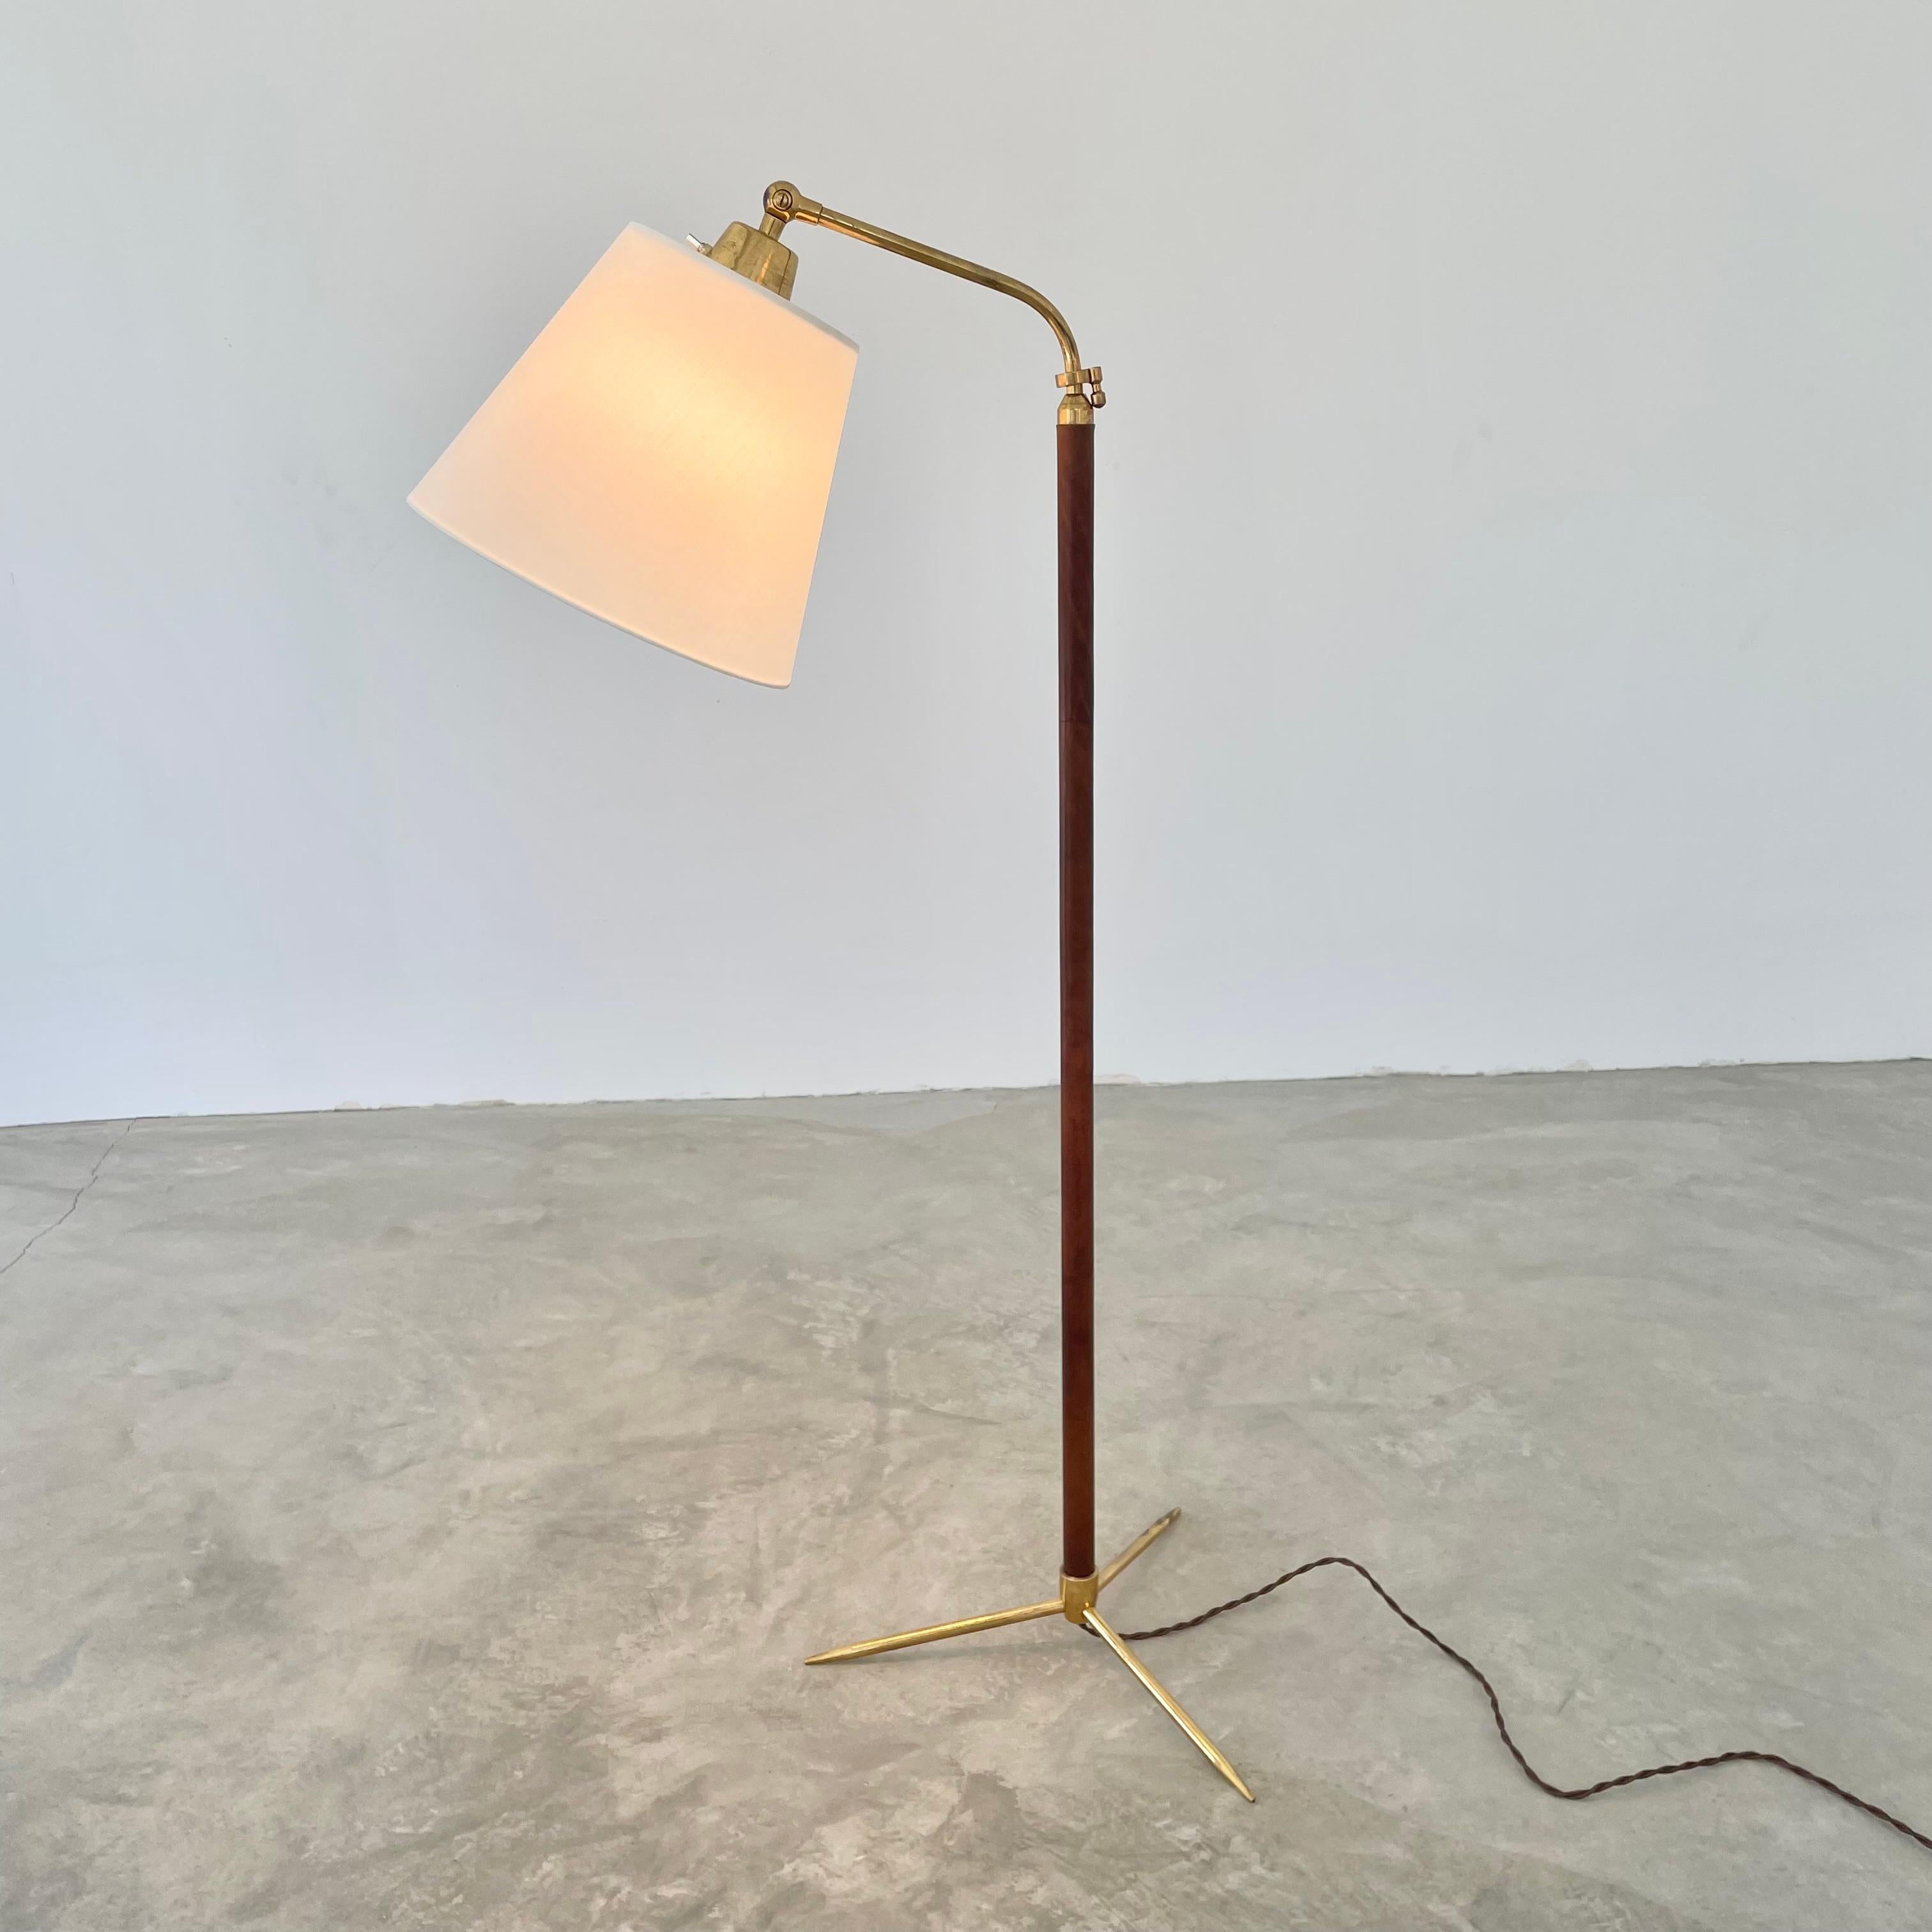 Handsome brass, leather and metal floor lamp by French designer Jacques Adnet. Circa 1950s. Tripod brass base secures into the stem which is wrapped in a beautiful saddle brown leather and secured with the signature Adnet contrast stitching down the